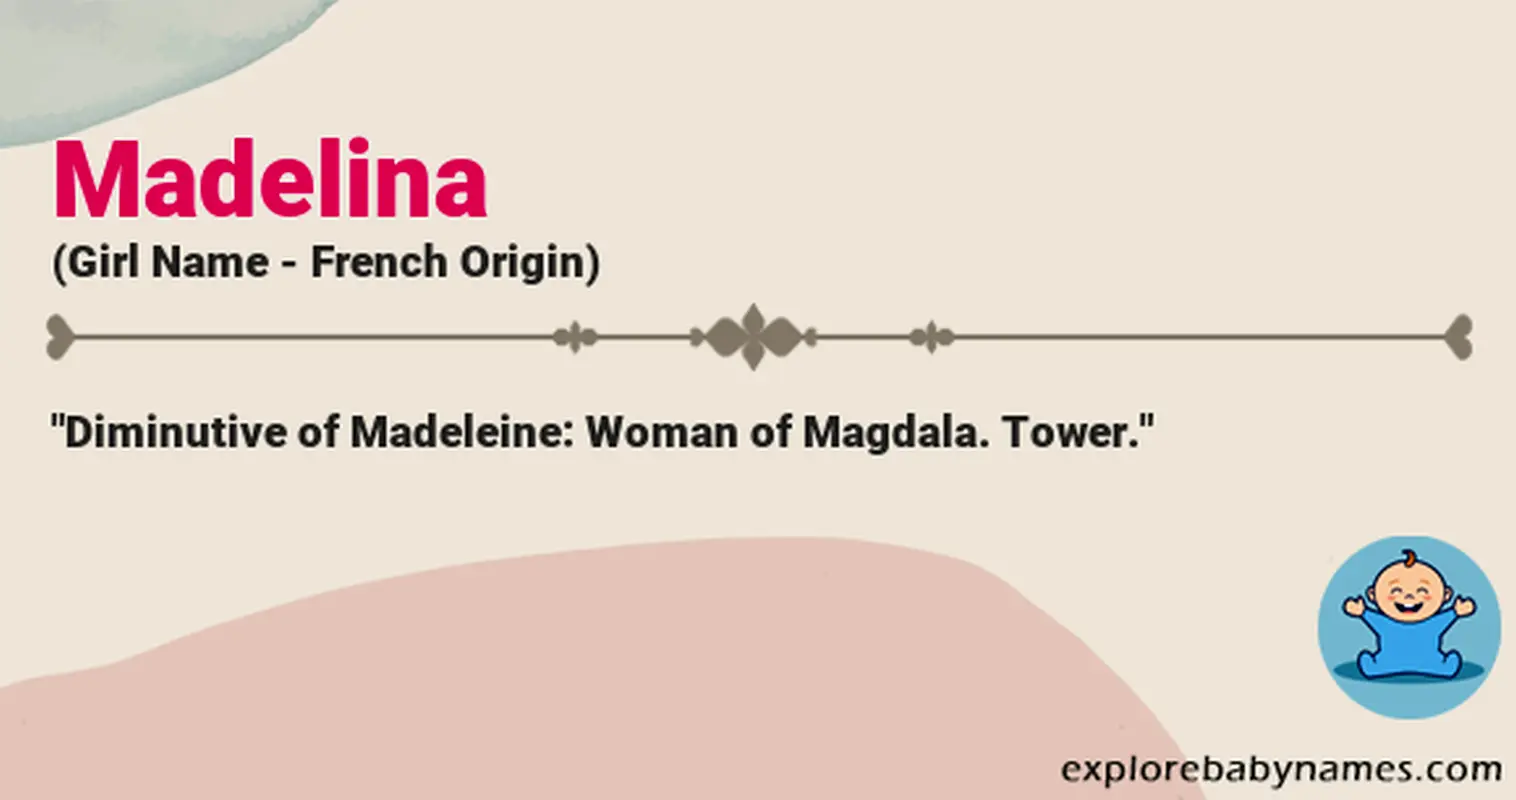 Meaning of Madelina